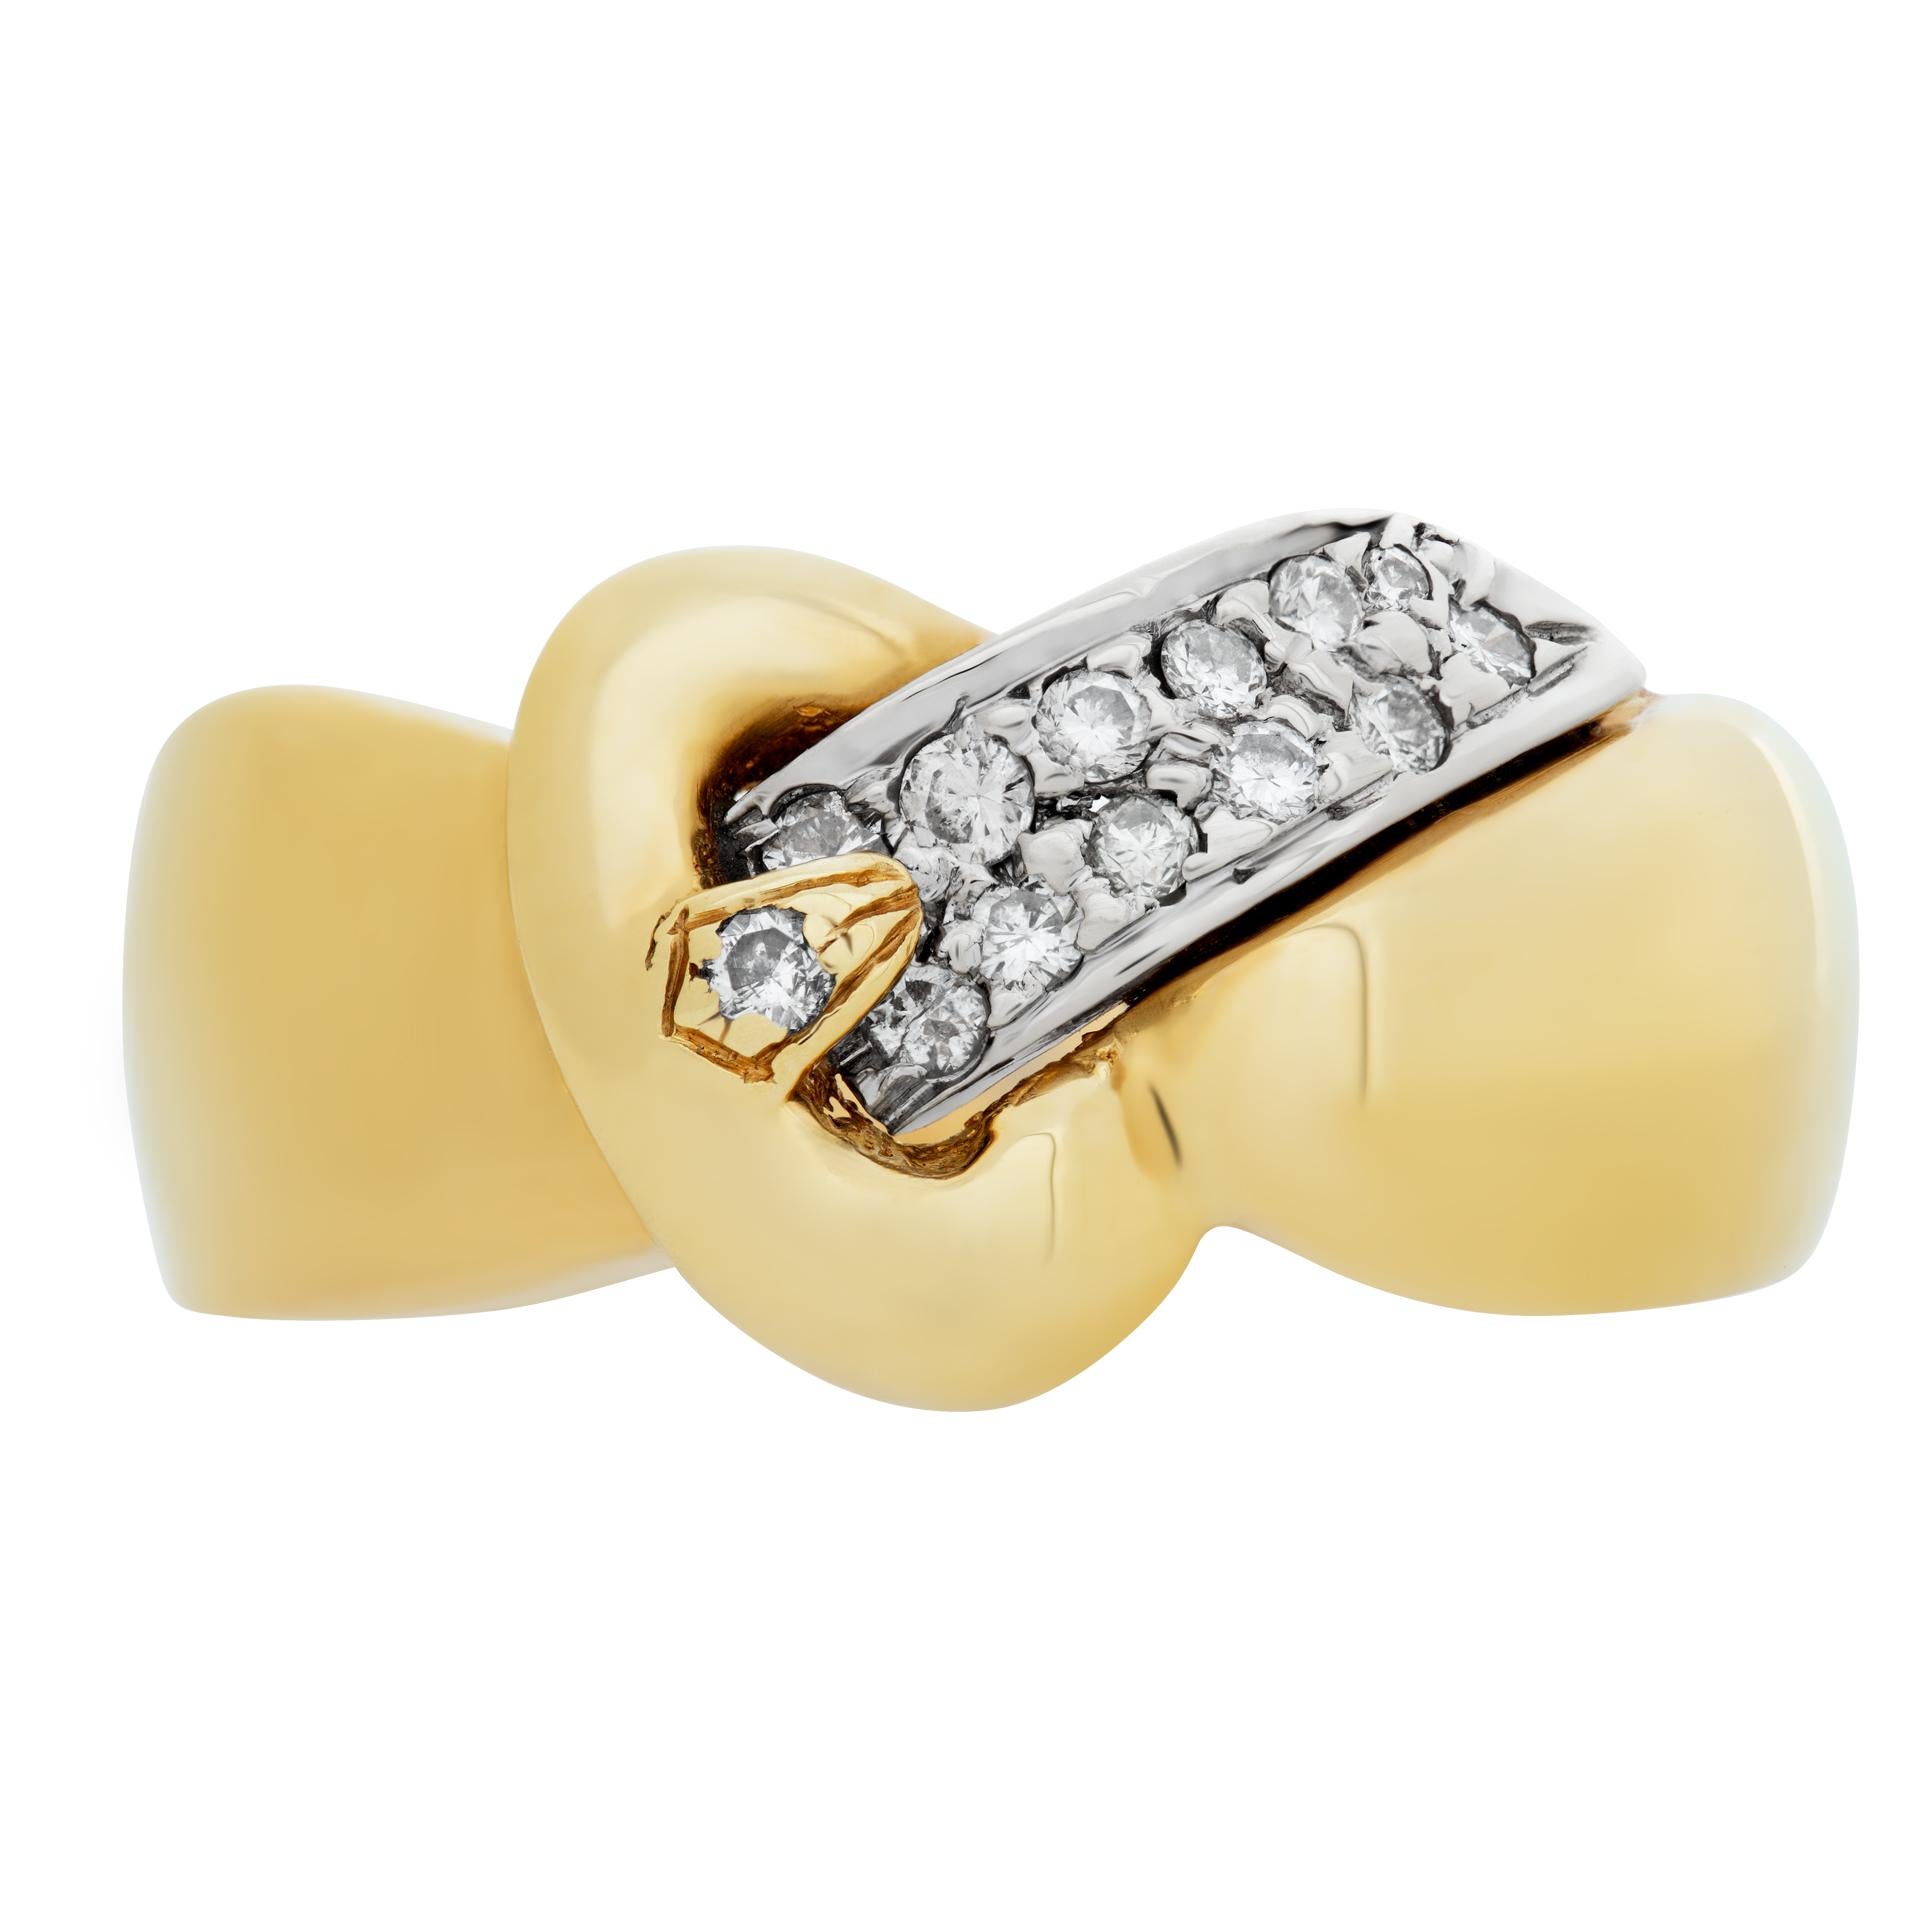 Buckle ring in 18k yellow gold with diamond accents. Size 6, 10.2mm width.This Diamond ring is currently size 6 and some items can be sized up or down, please ask! It weighs 4 pennyweights and is 18k.